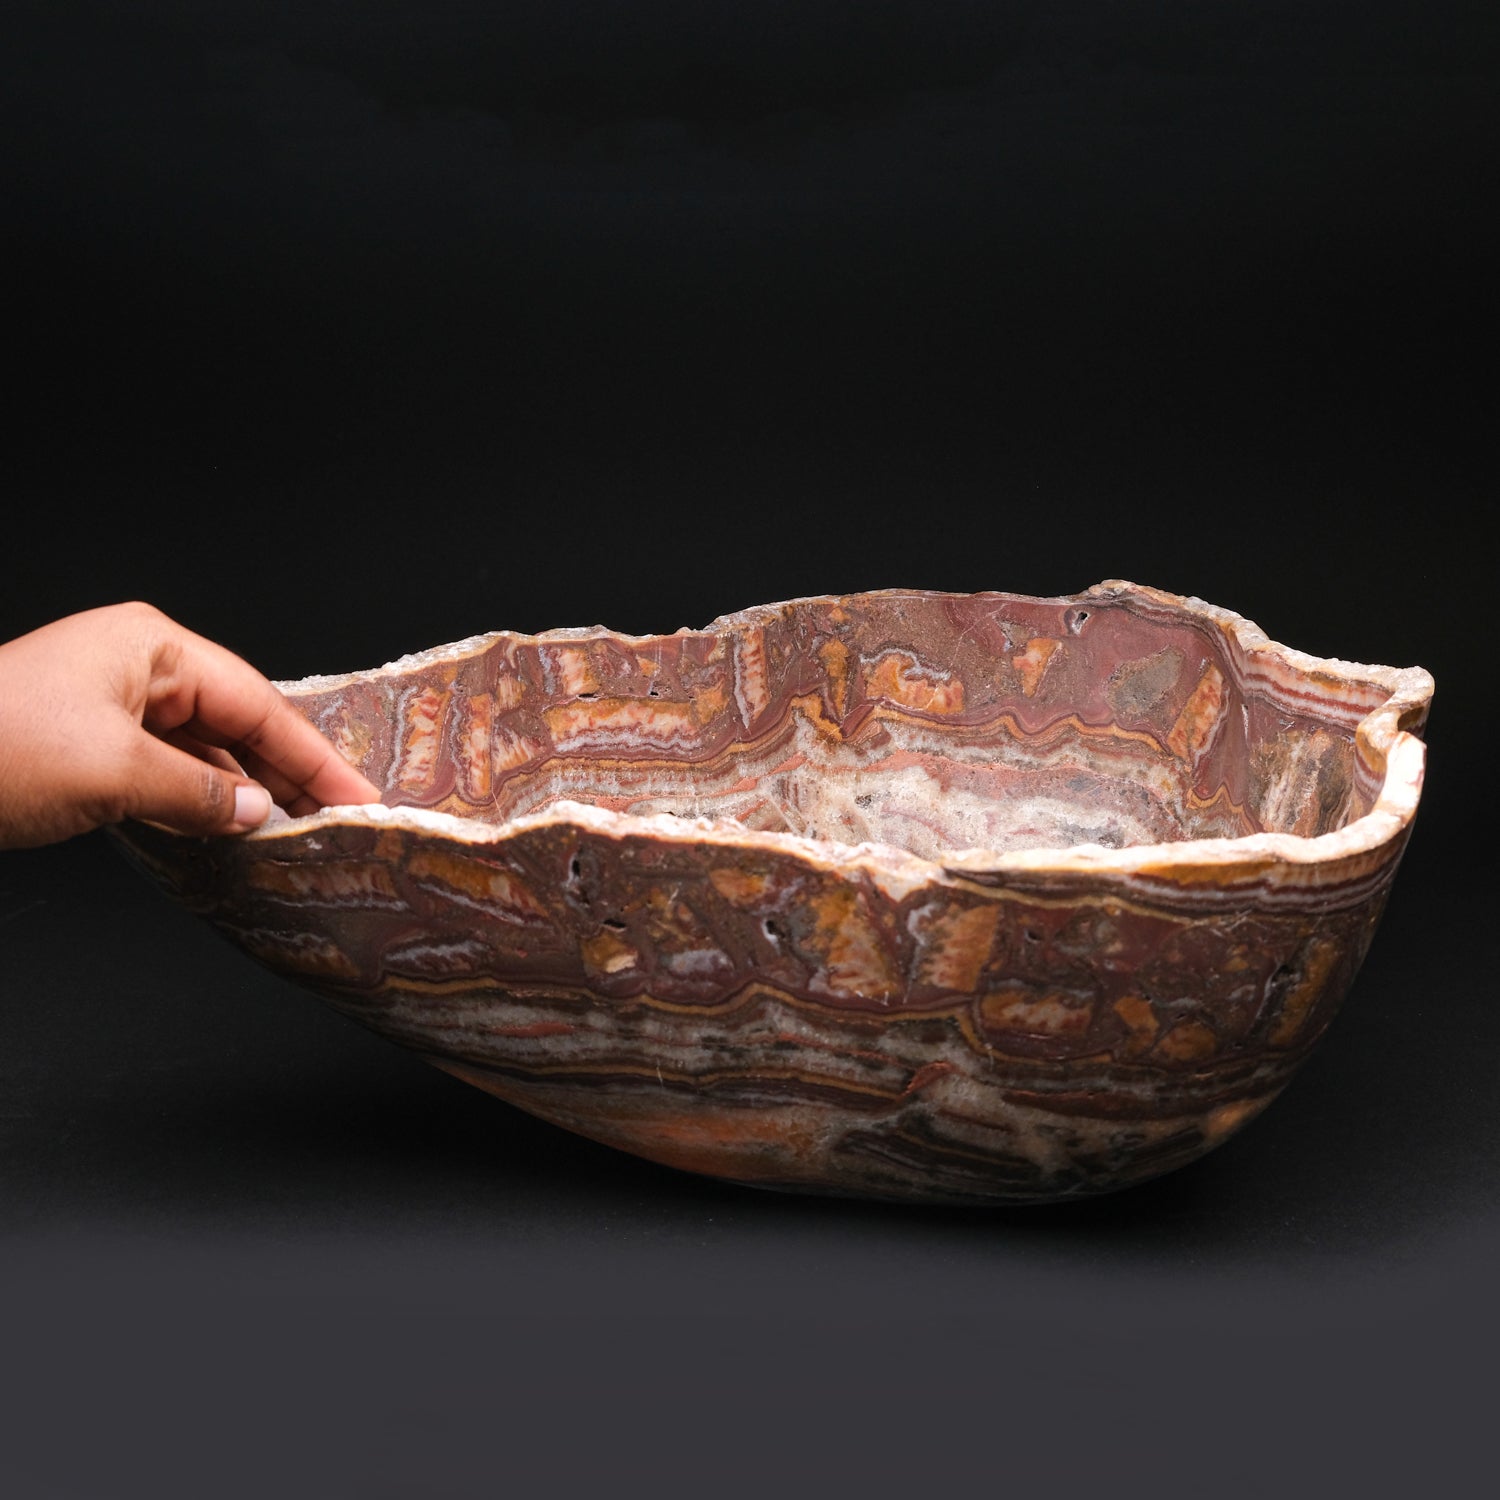 Genuine Saffron Brown Onyx Bowl From Mexico (14.4 lbs)